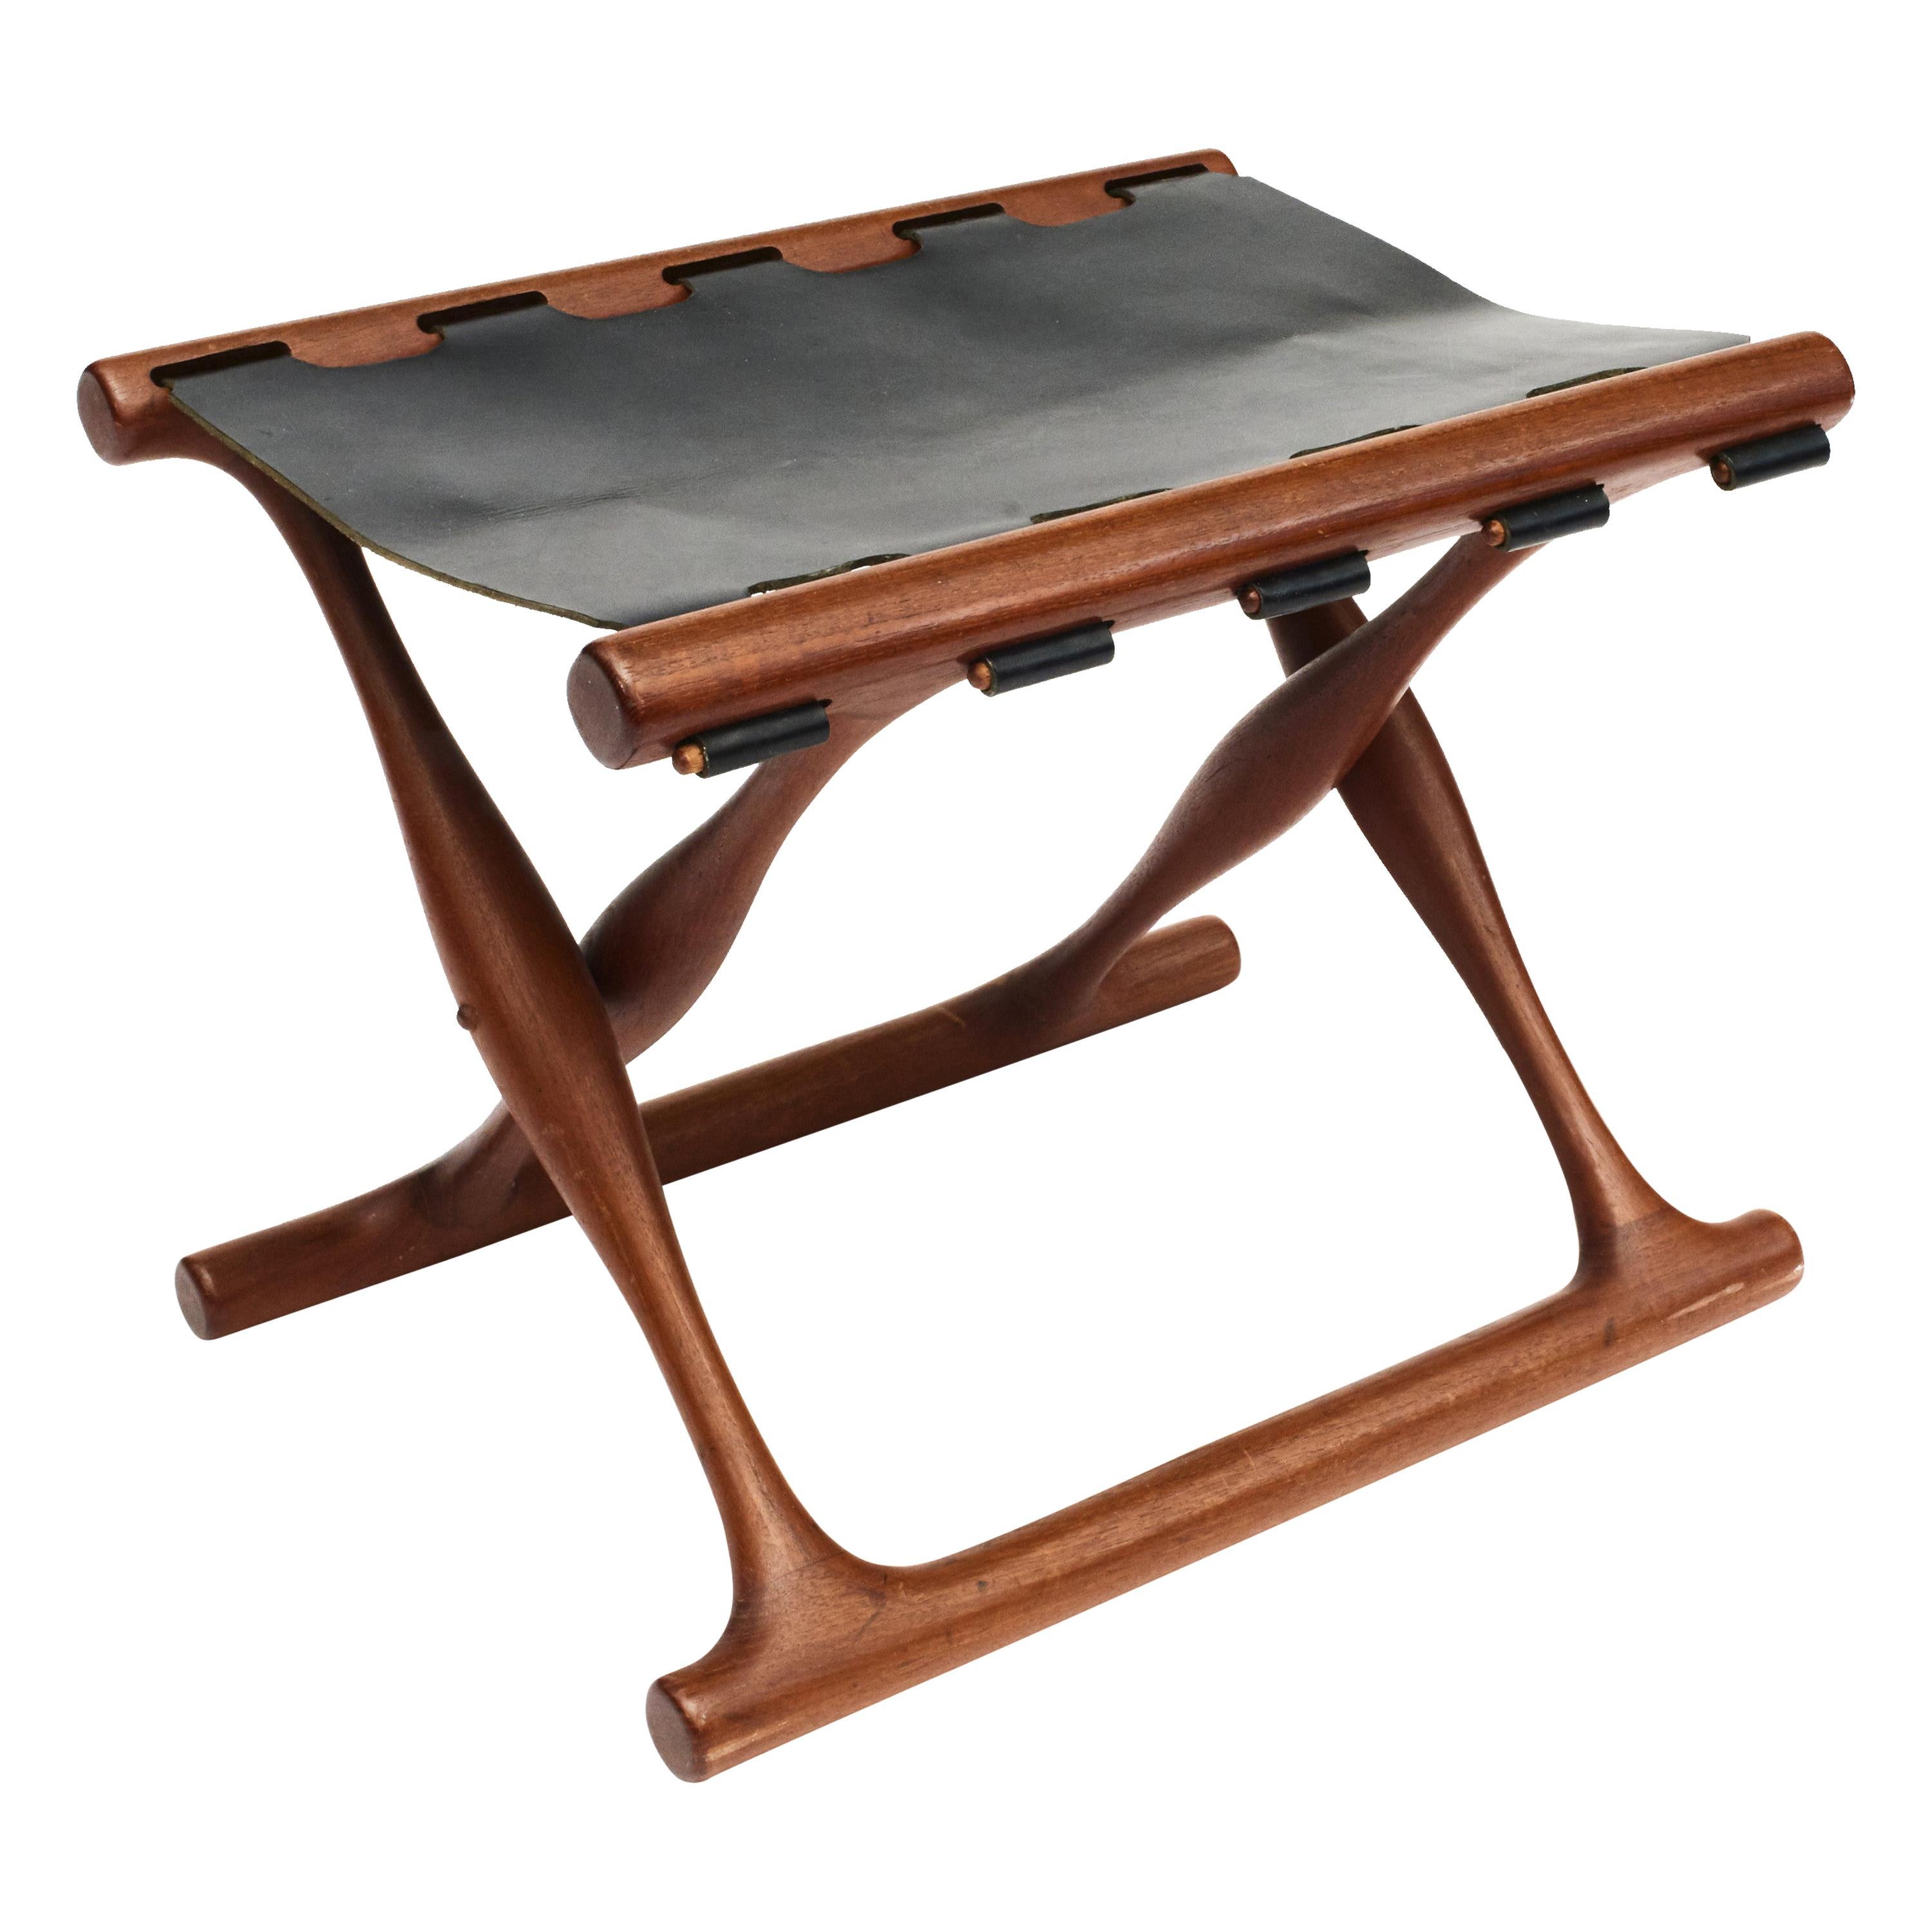 ”Gold Hill” Teak and Leather Folding Stool by Poul Hundevad